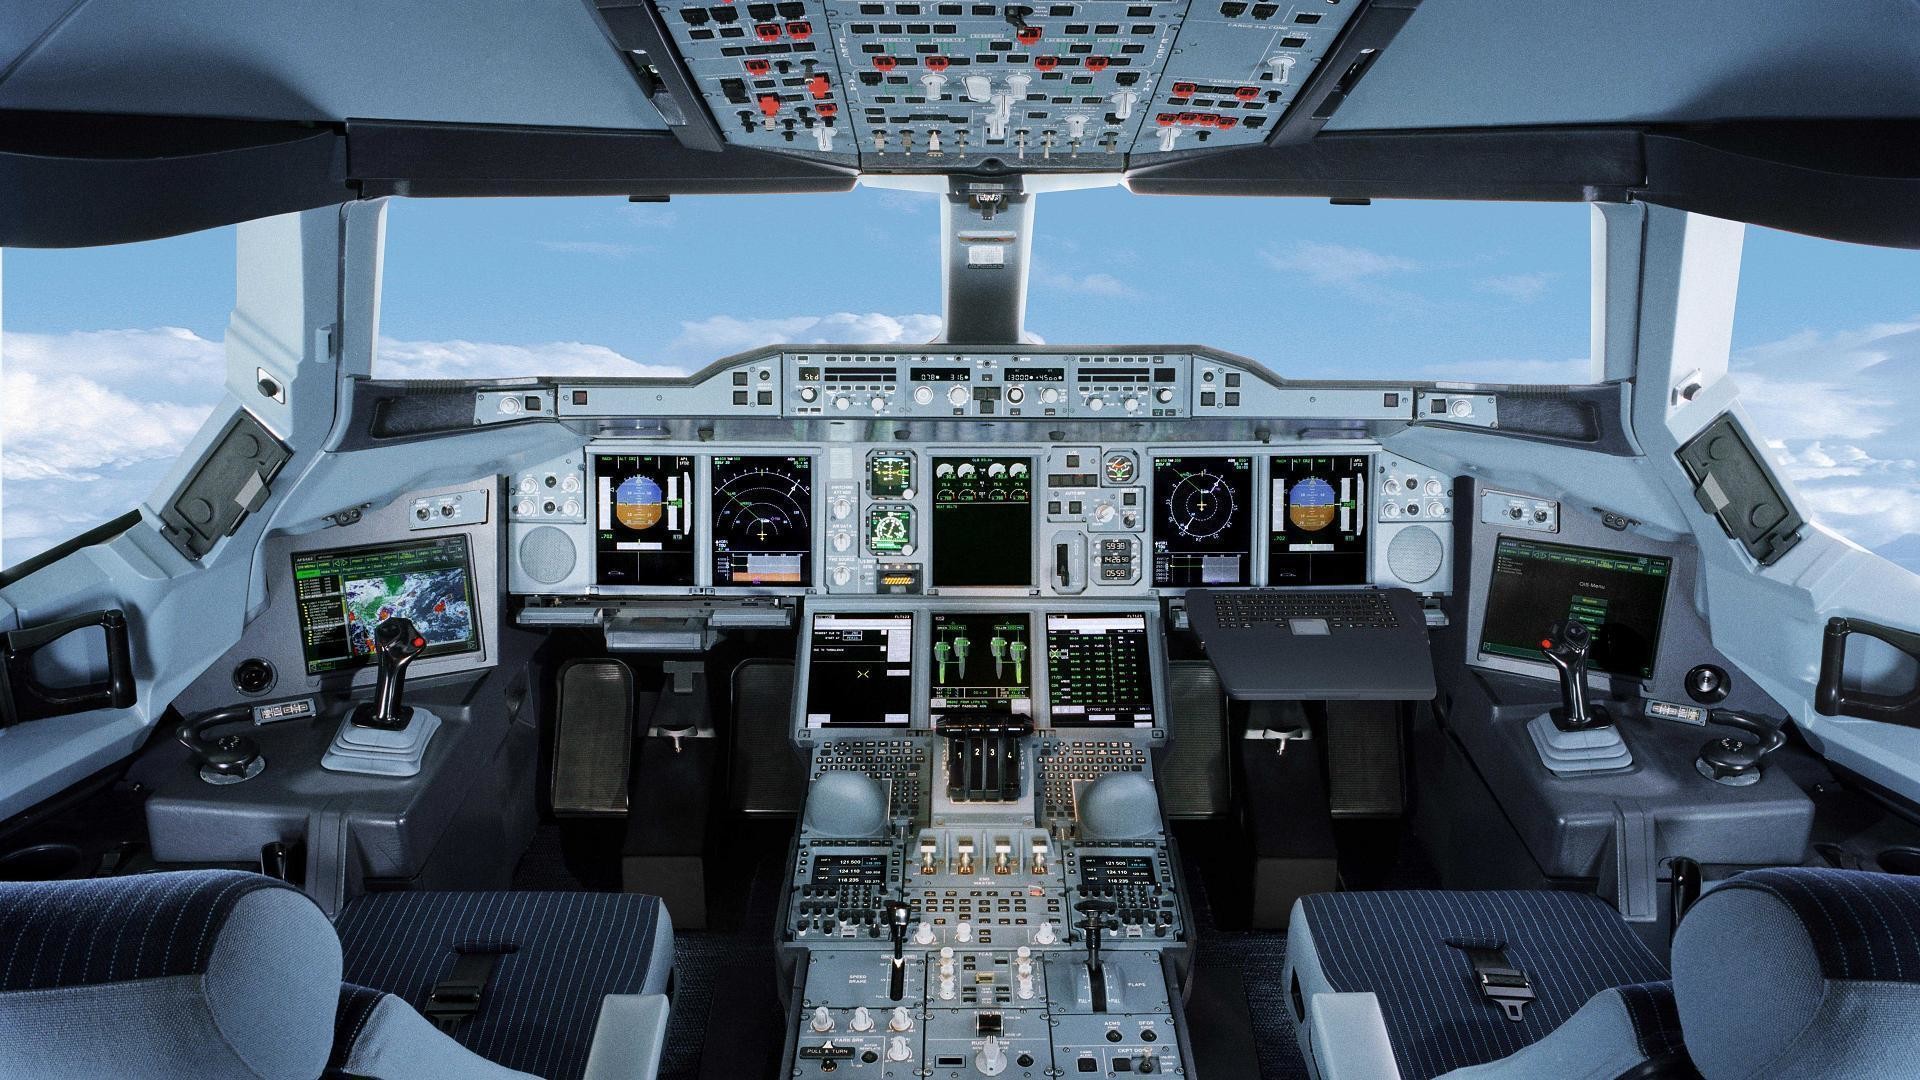 1920x1080 Airplane Cockpit Wallpaper - Viewing Gallery